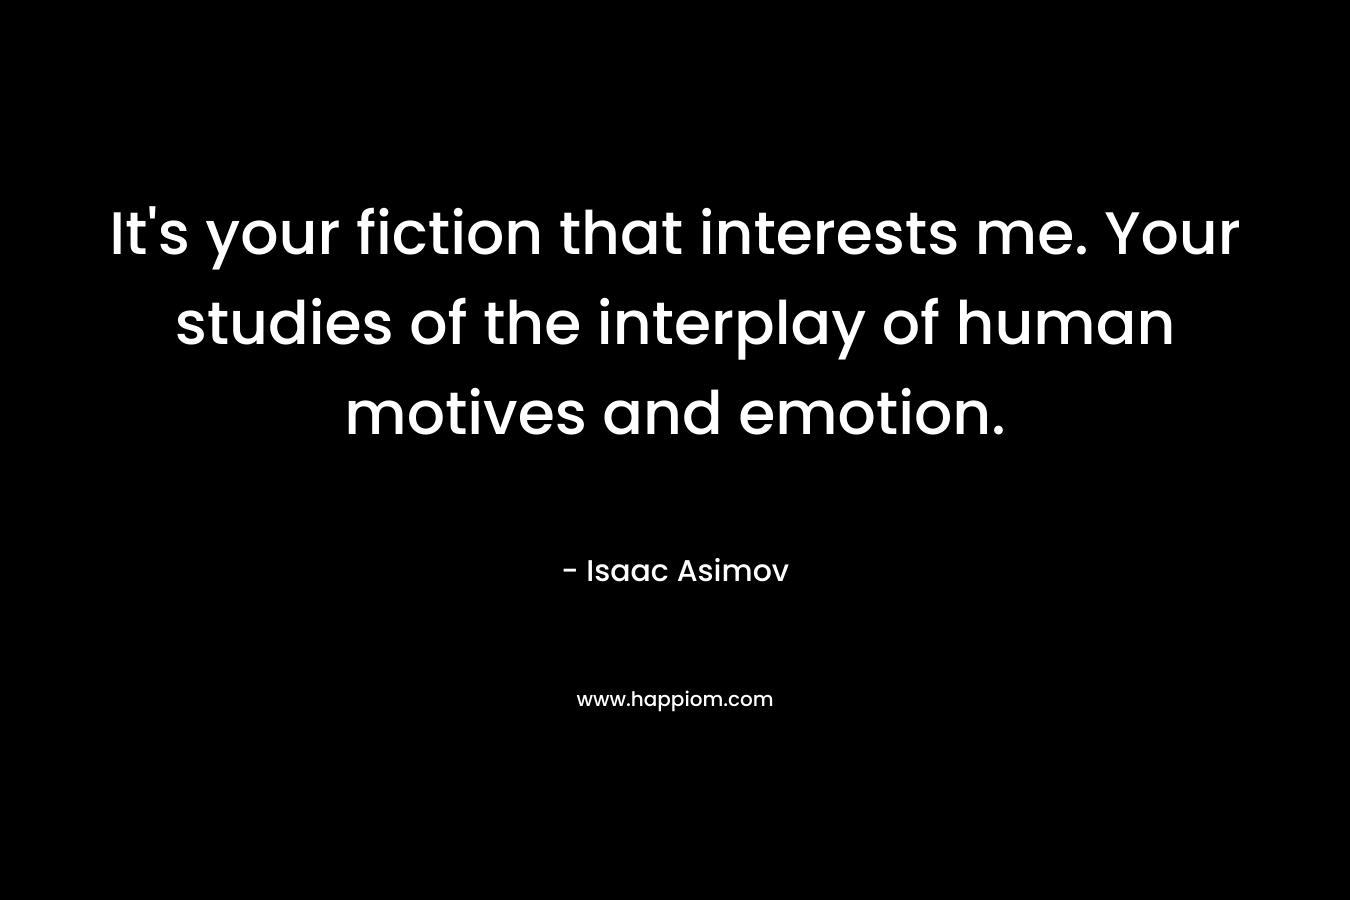 It’s your fiction that interests me. Your studies of the interplay of human motives and emotion. – Isaac Asimov